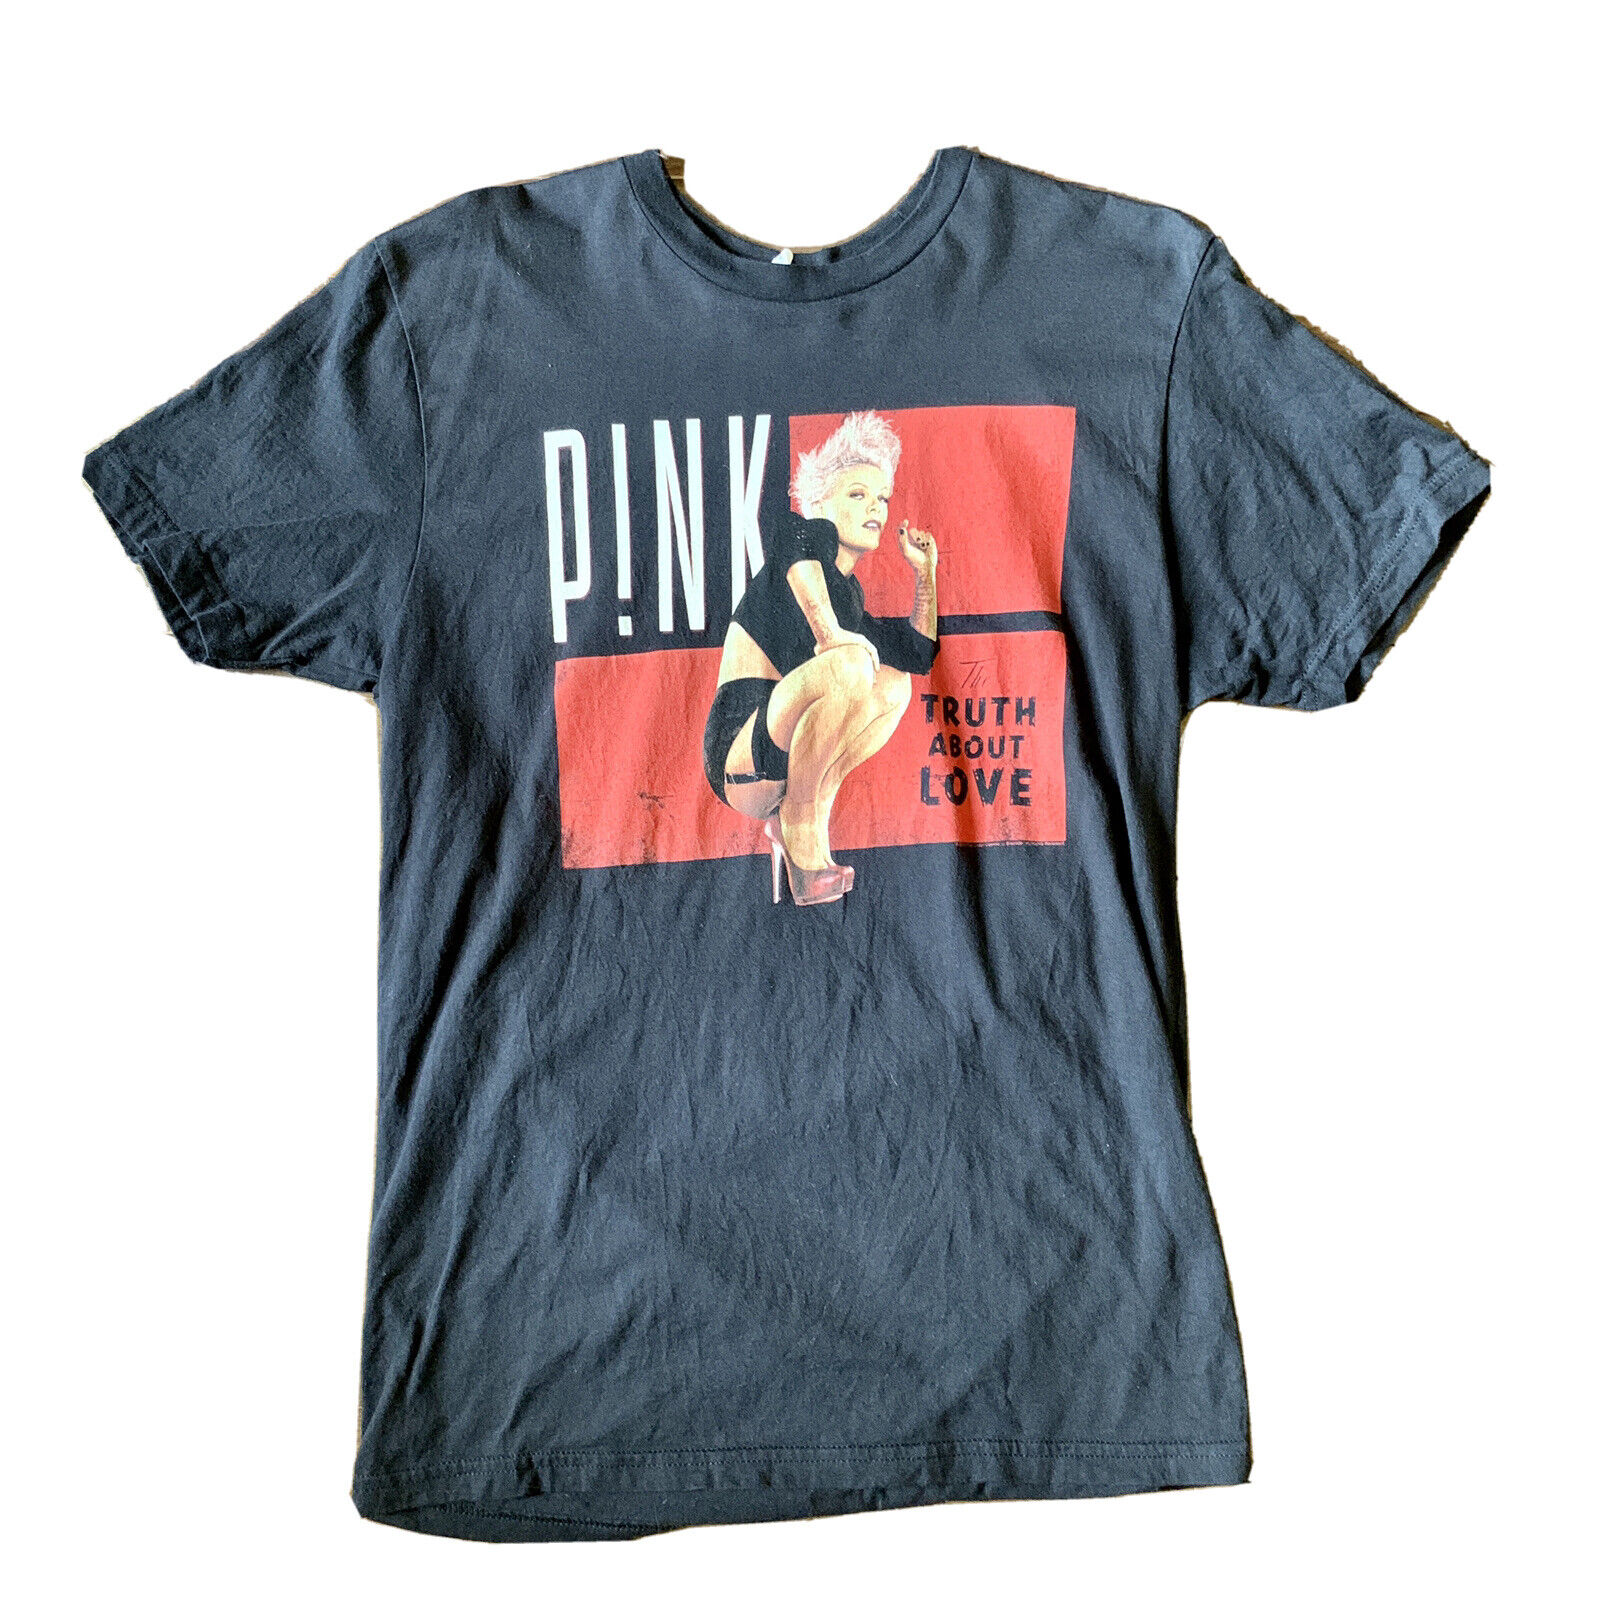 Licensed 2013 Pink "the Truth About Love" Concert Tour T-shirt W Medium Black